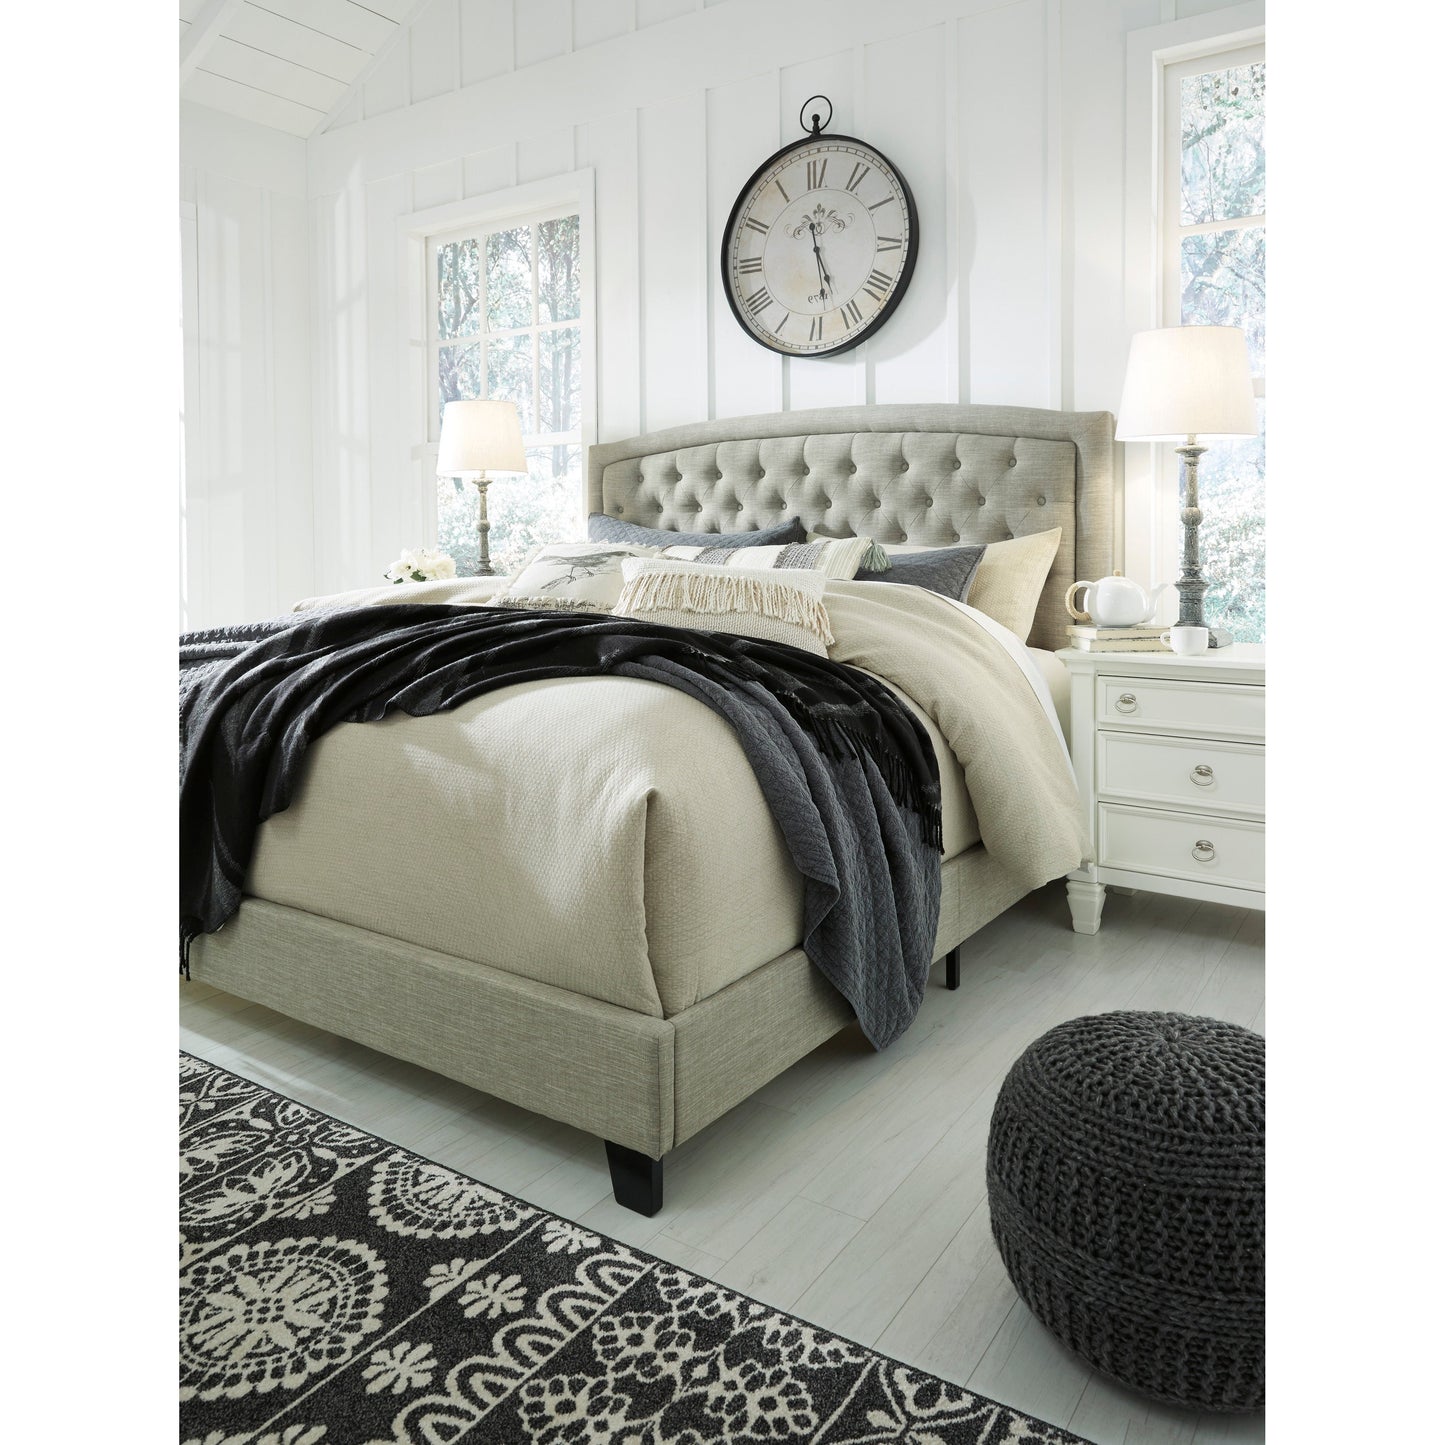 JERARY UPHOLSTERED BED - GRAY